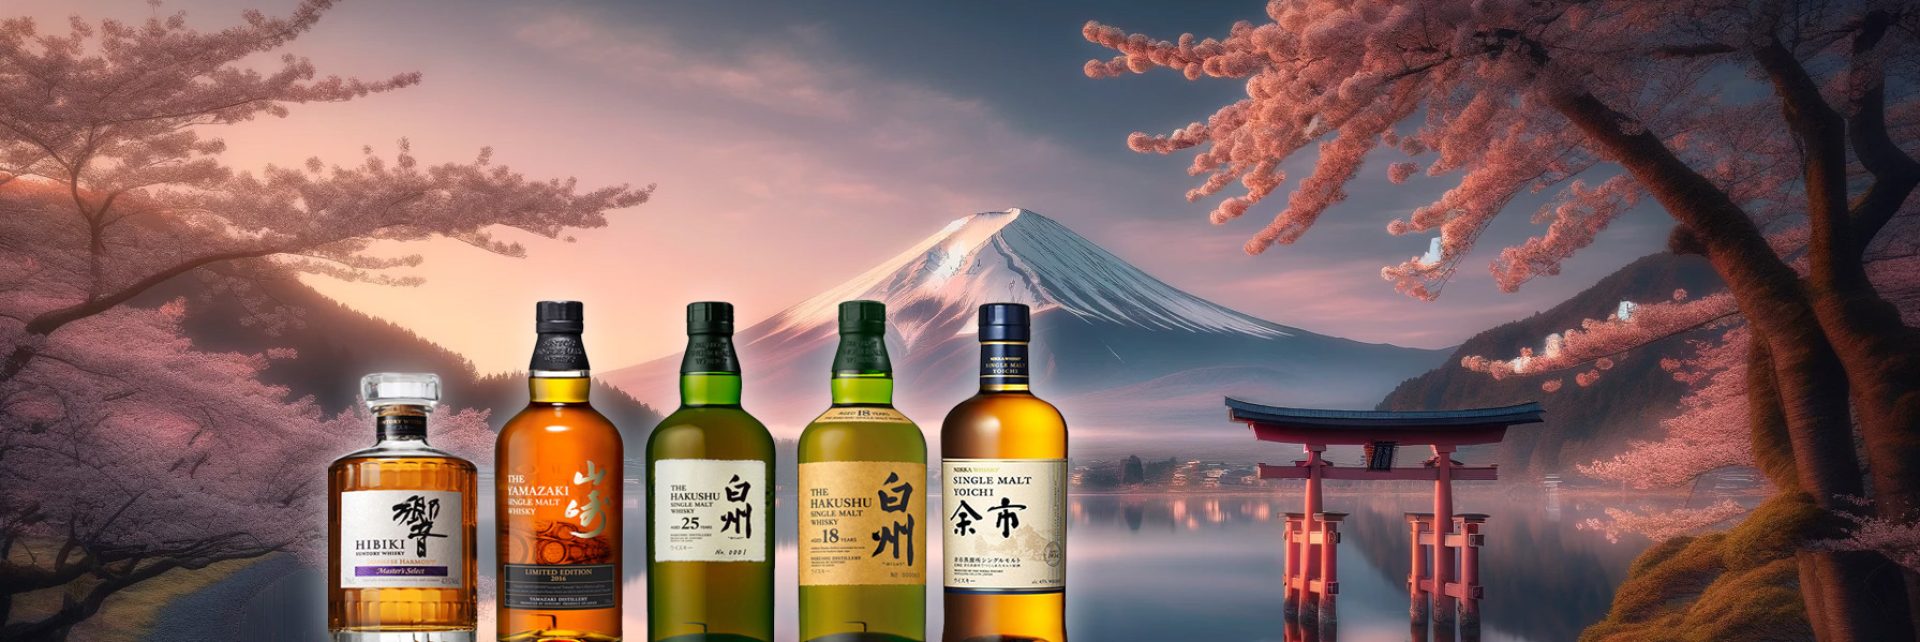 Japanese Whisky: 5 Important Facts You Need to Know